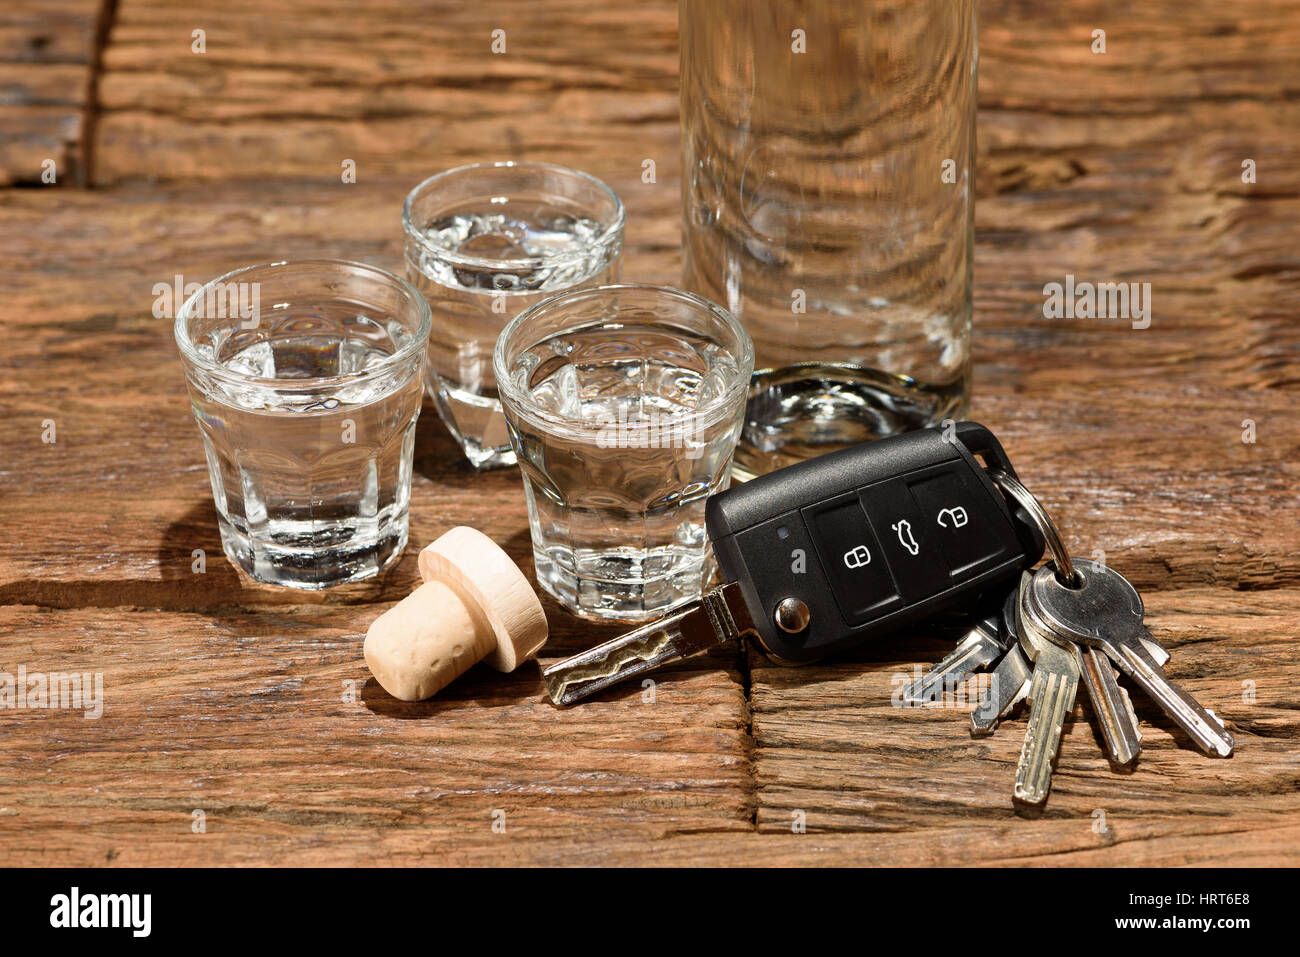 Shot glasses and a car key on an old wooden table. Don't drink and drive. Stock Photo